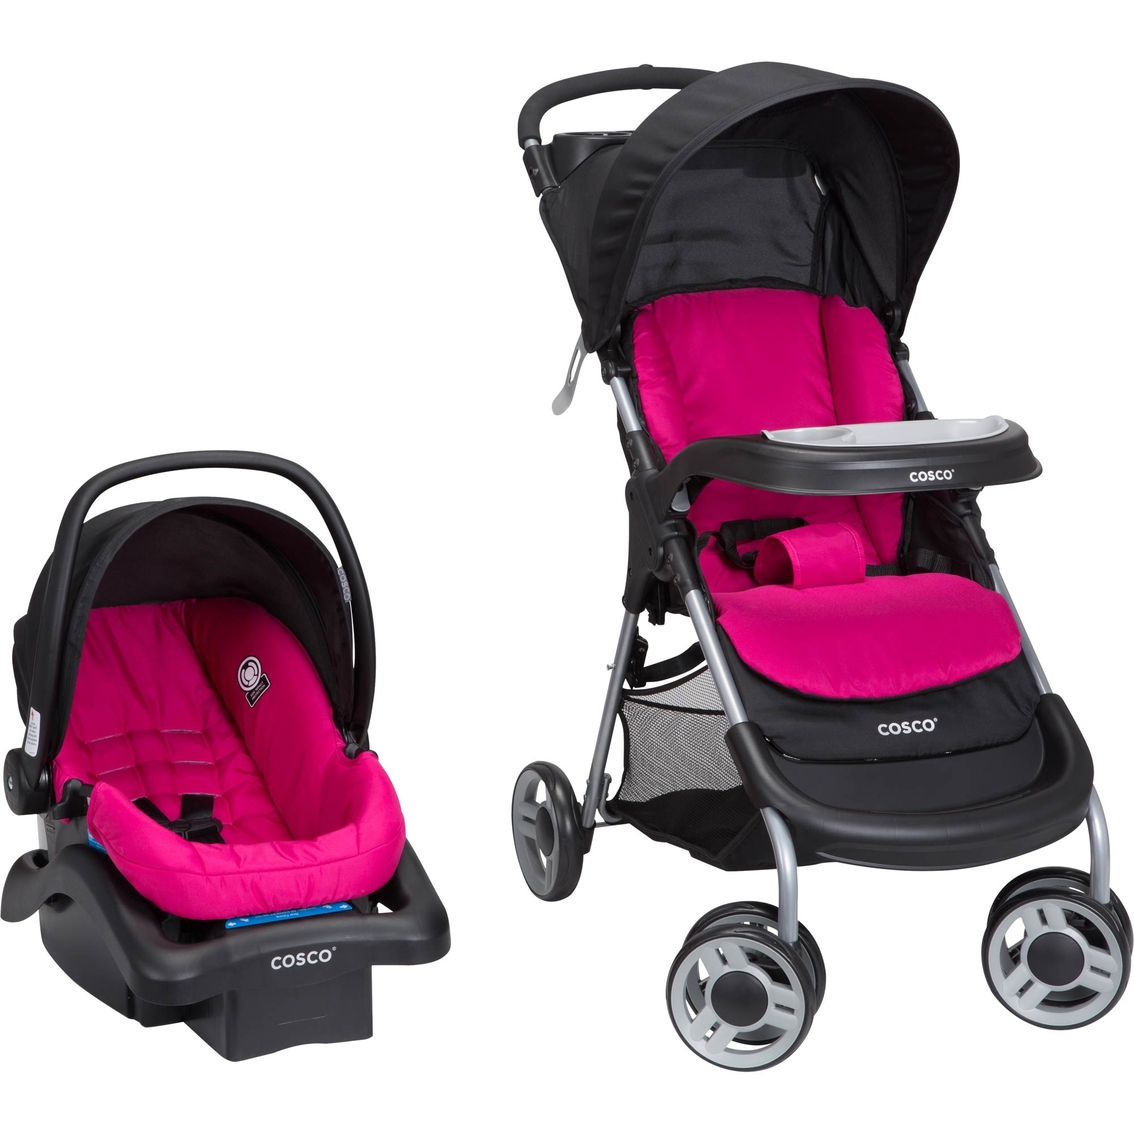 Cosco Lift & Stroll Plus Travel System Car Seats Baby